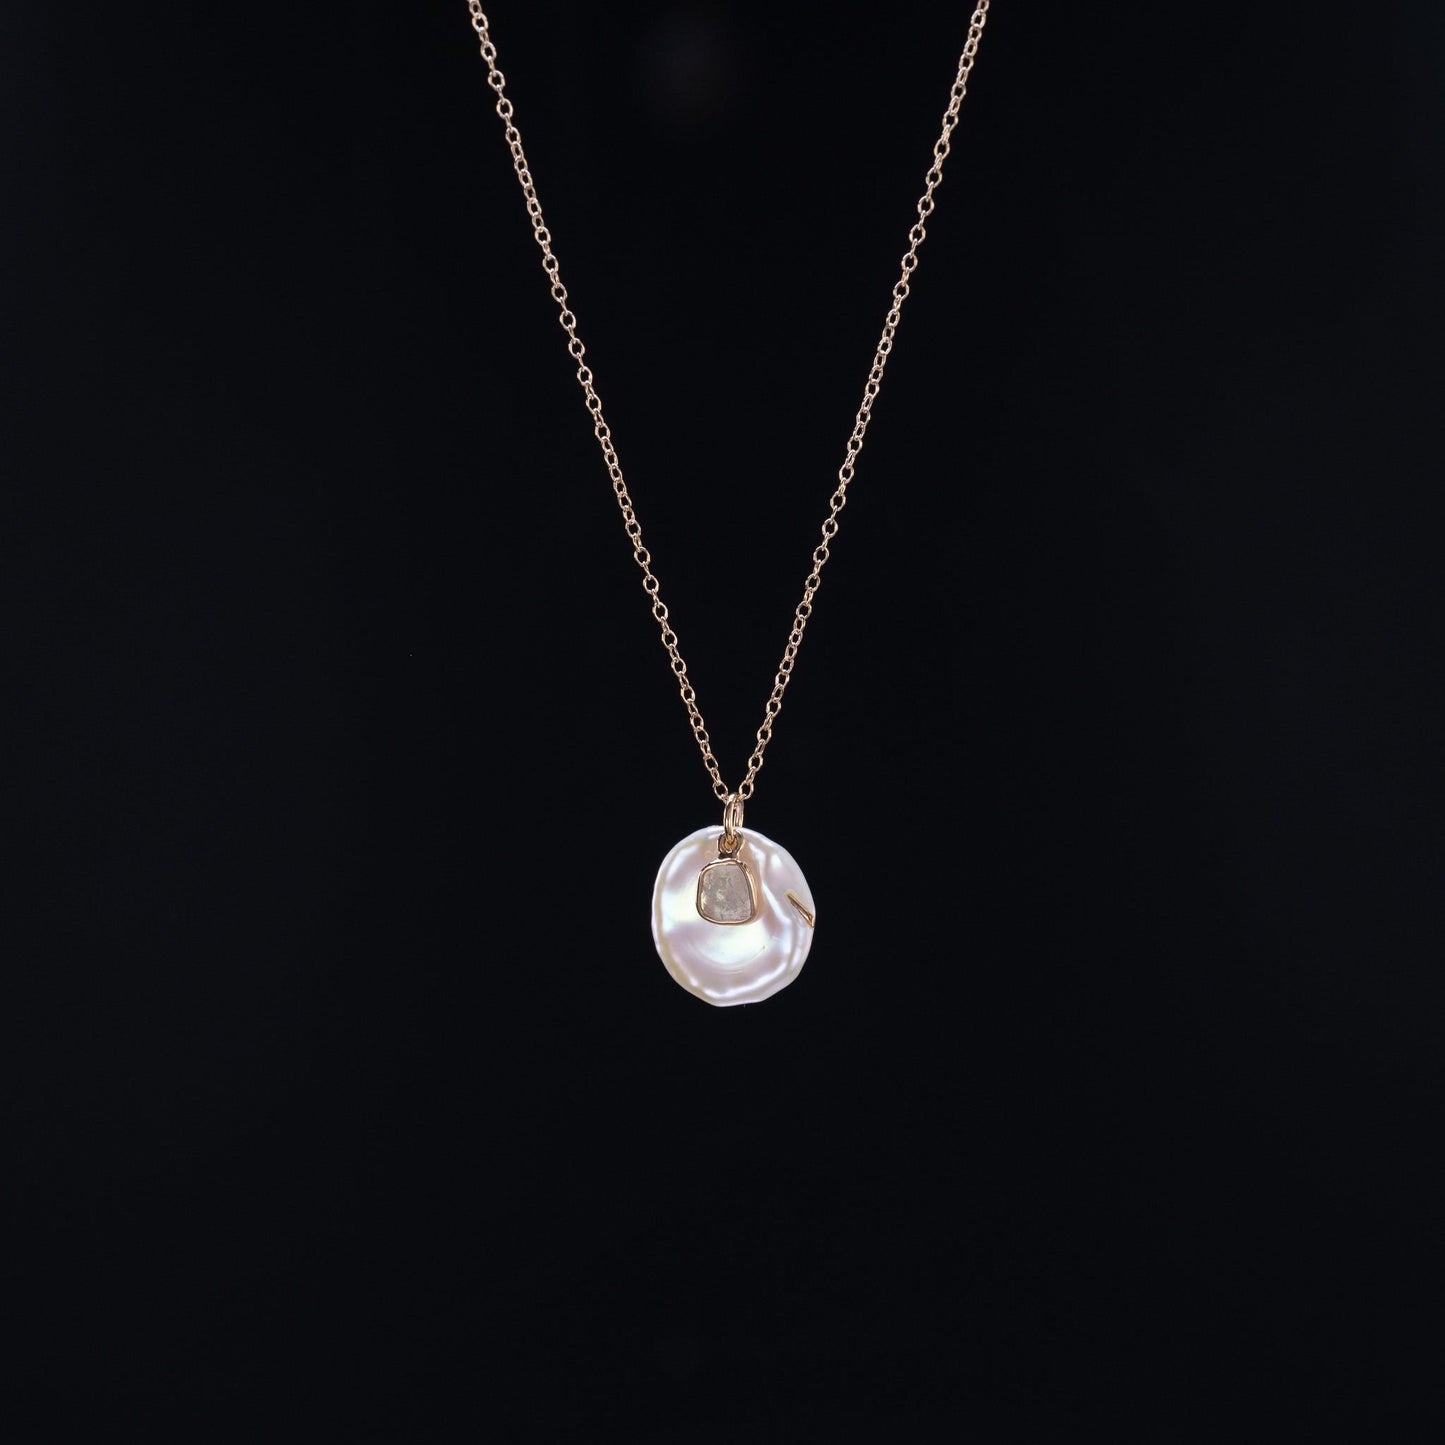 14K Yellow Gold Kieshi Pearl and Sliced Champagne Diamond Necklace